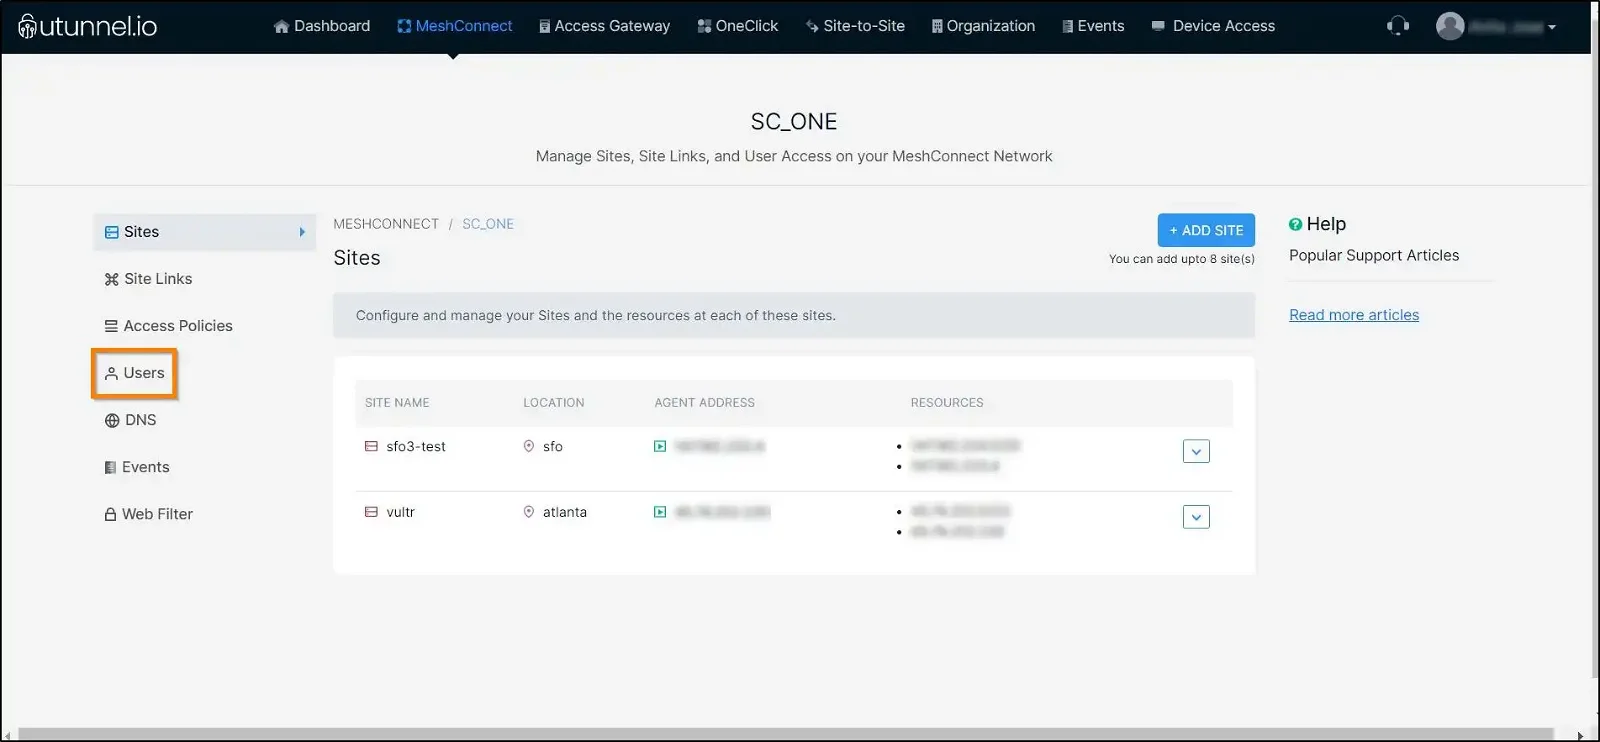 How to manage users on a MeshConnect network navigate to Users page